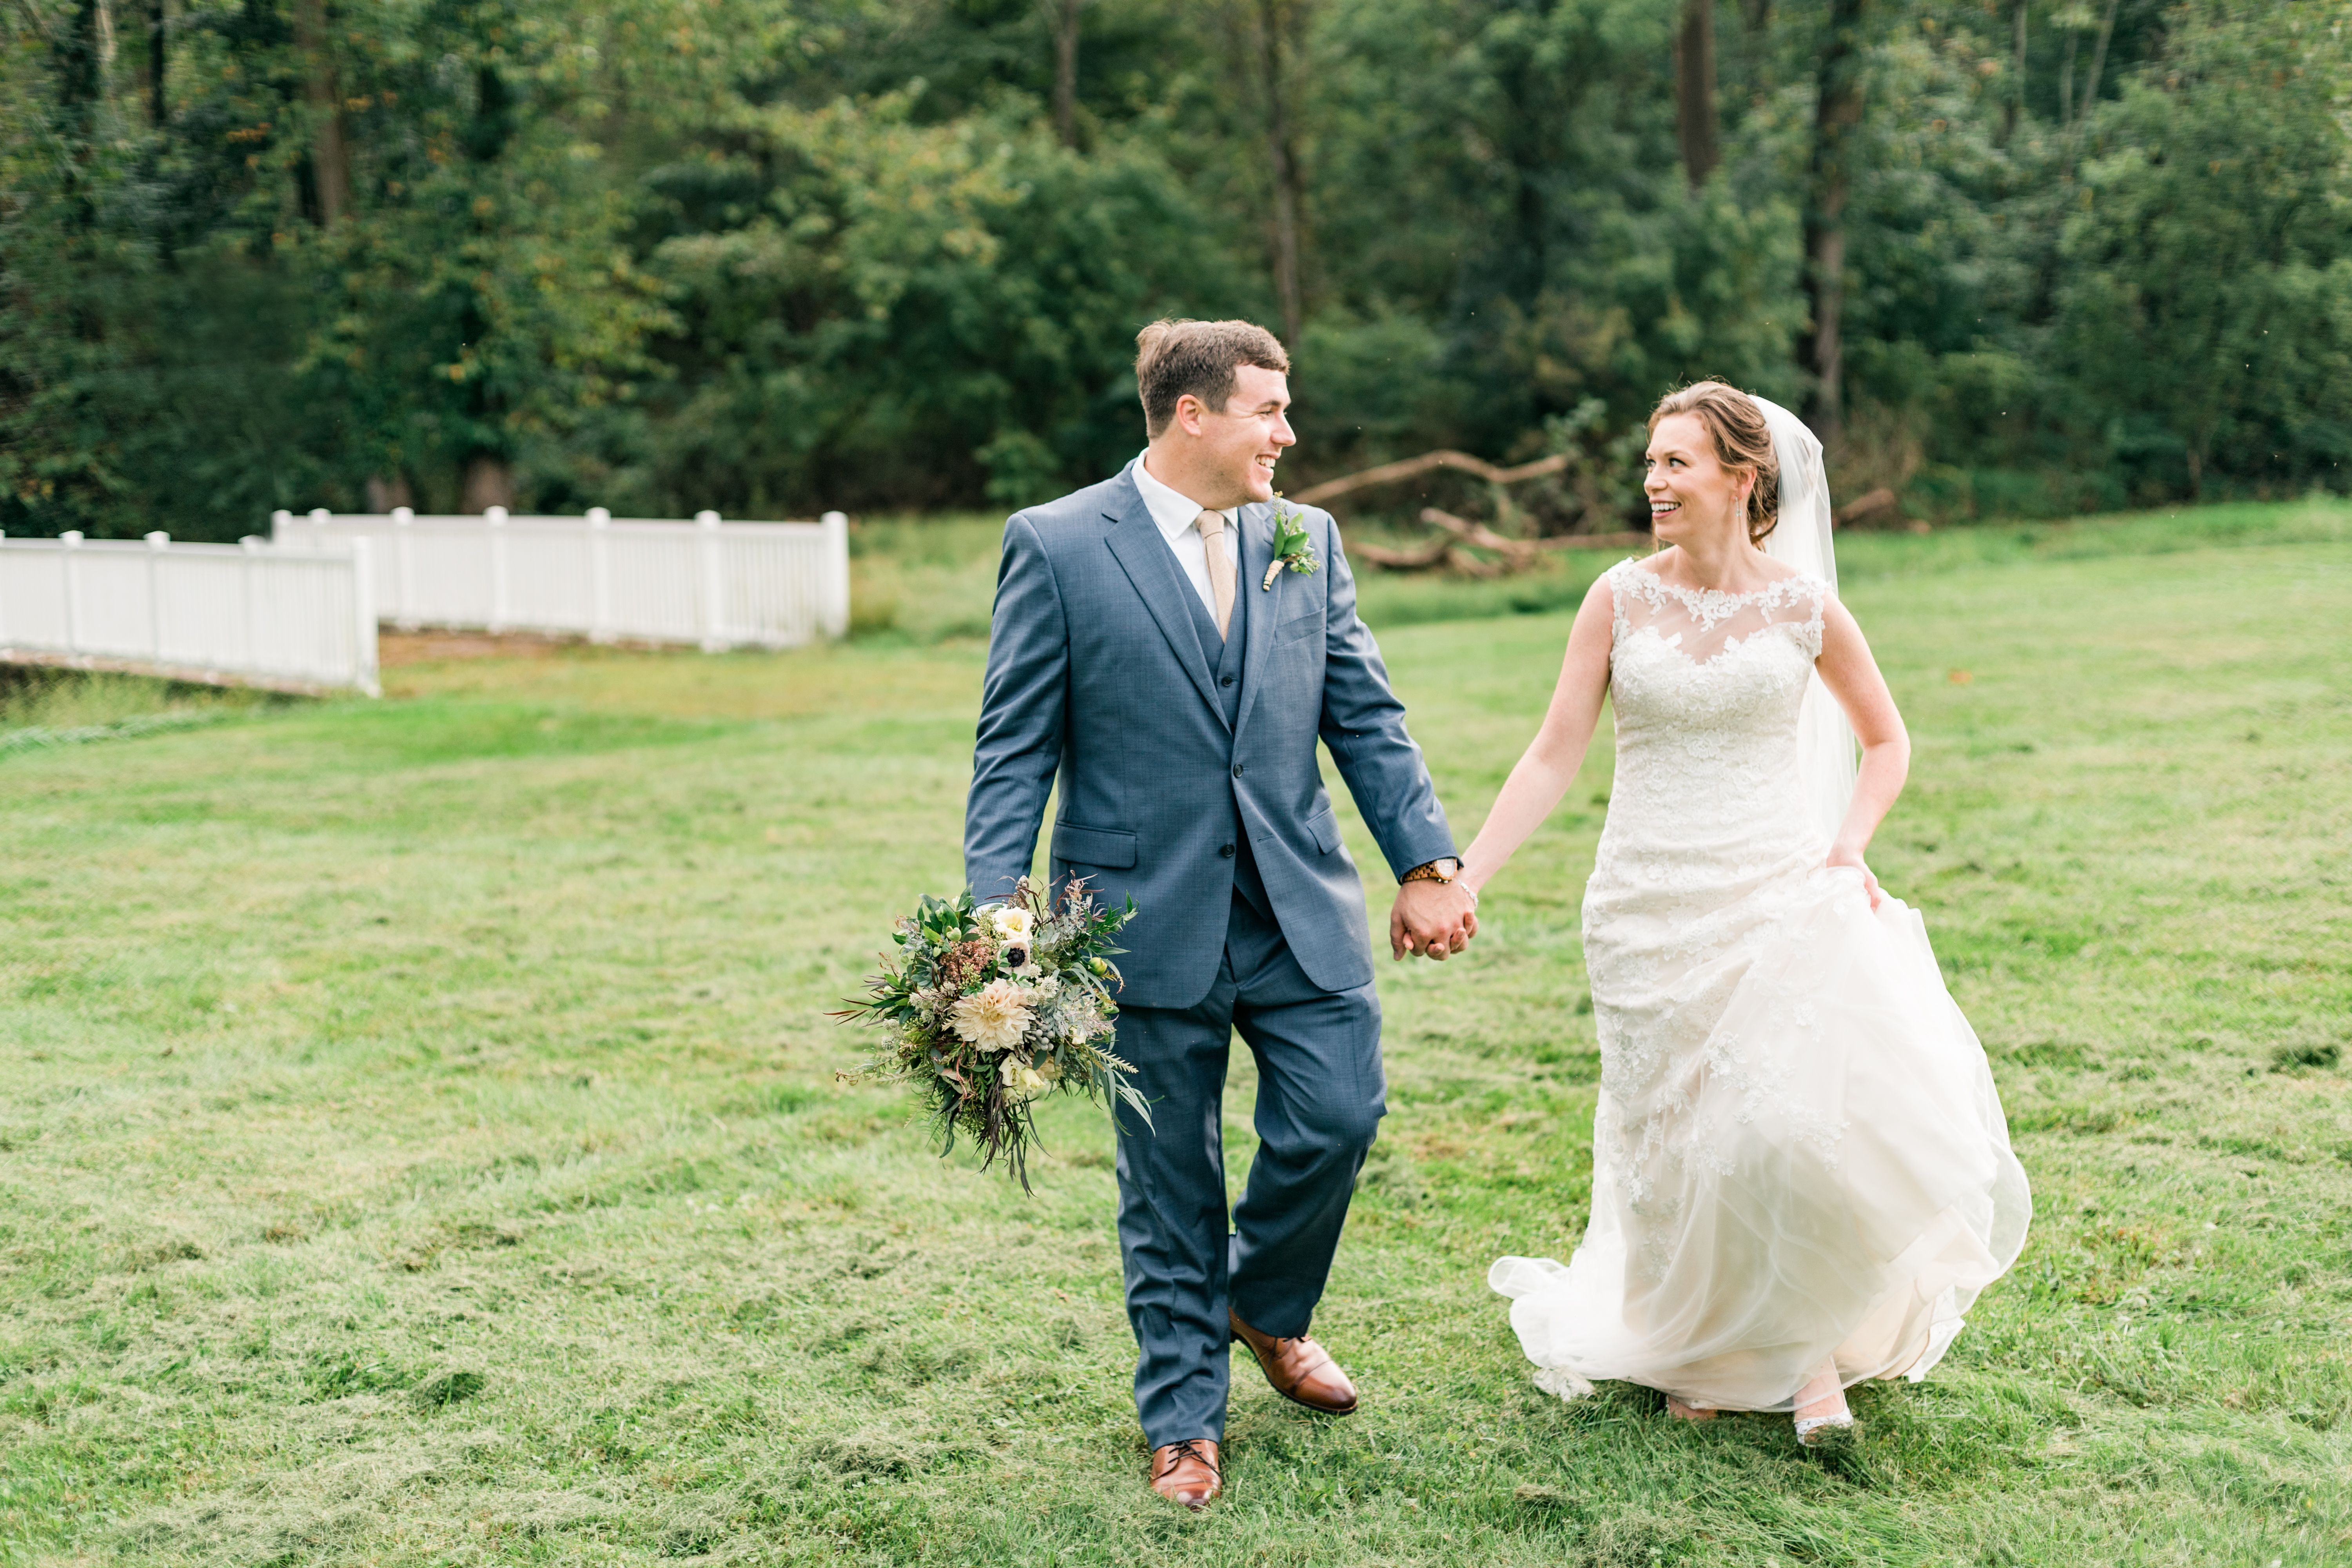 Richie & Kati's Navy & Lavender Rustic Wedding at The Barn on Bridge in Collegeville, PA